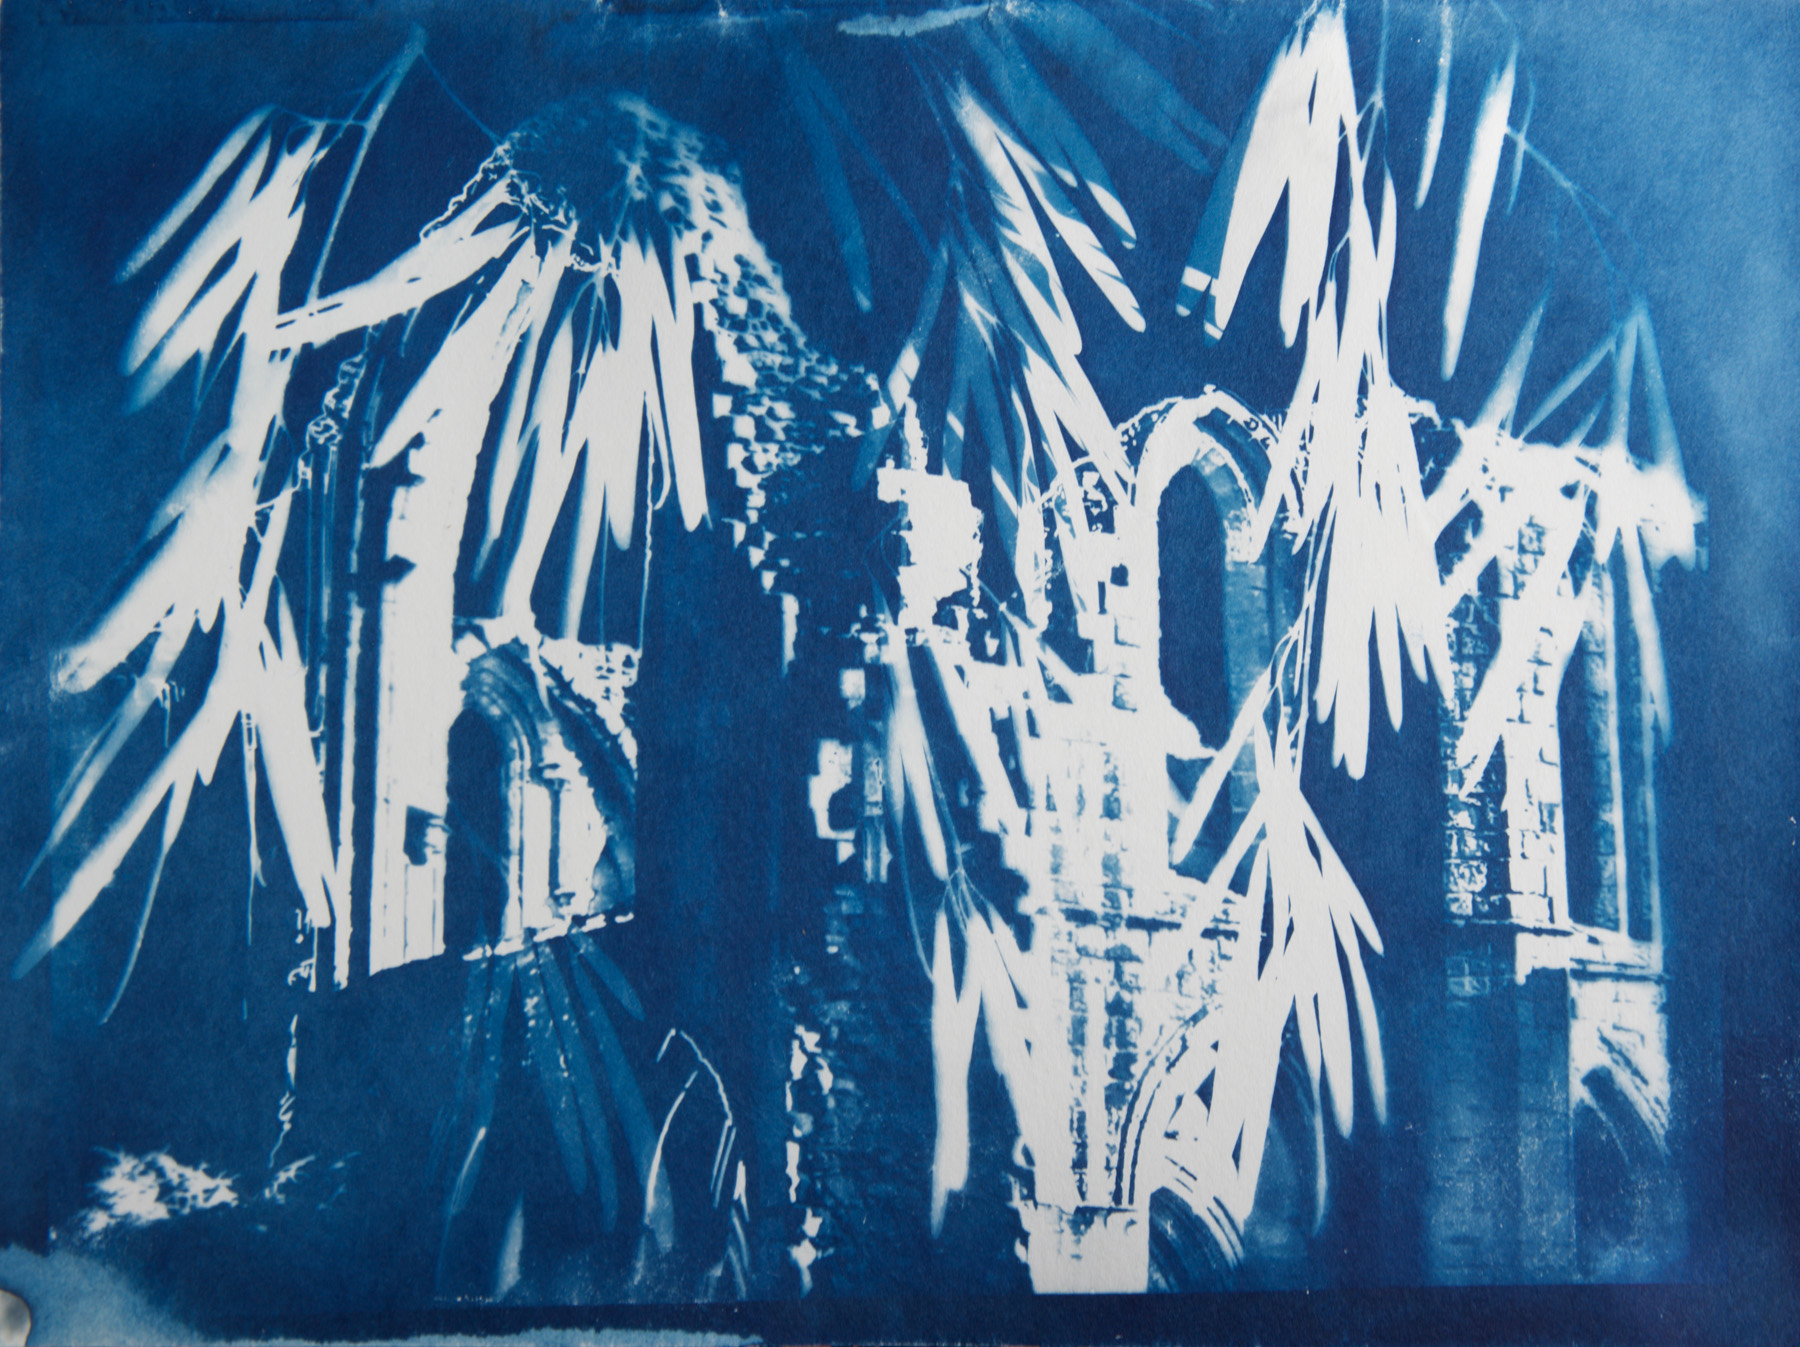  Marie Craig,  Fountains Abbey 2 ,&nbsp;cyanotype on paper, 9x12 